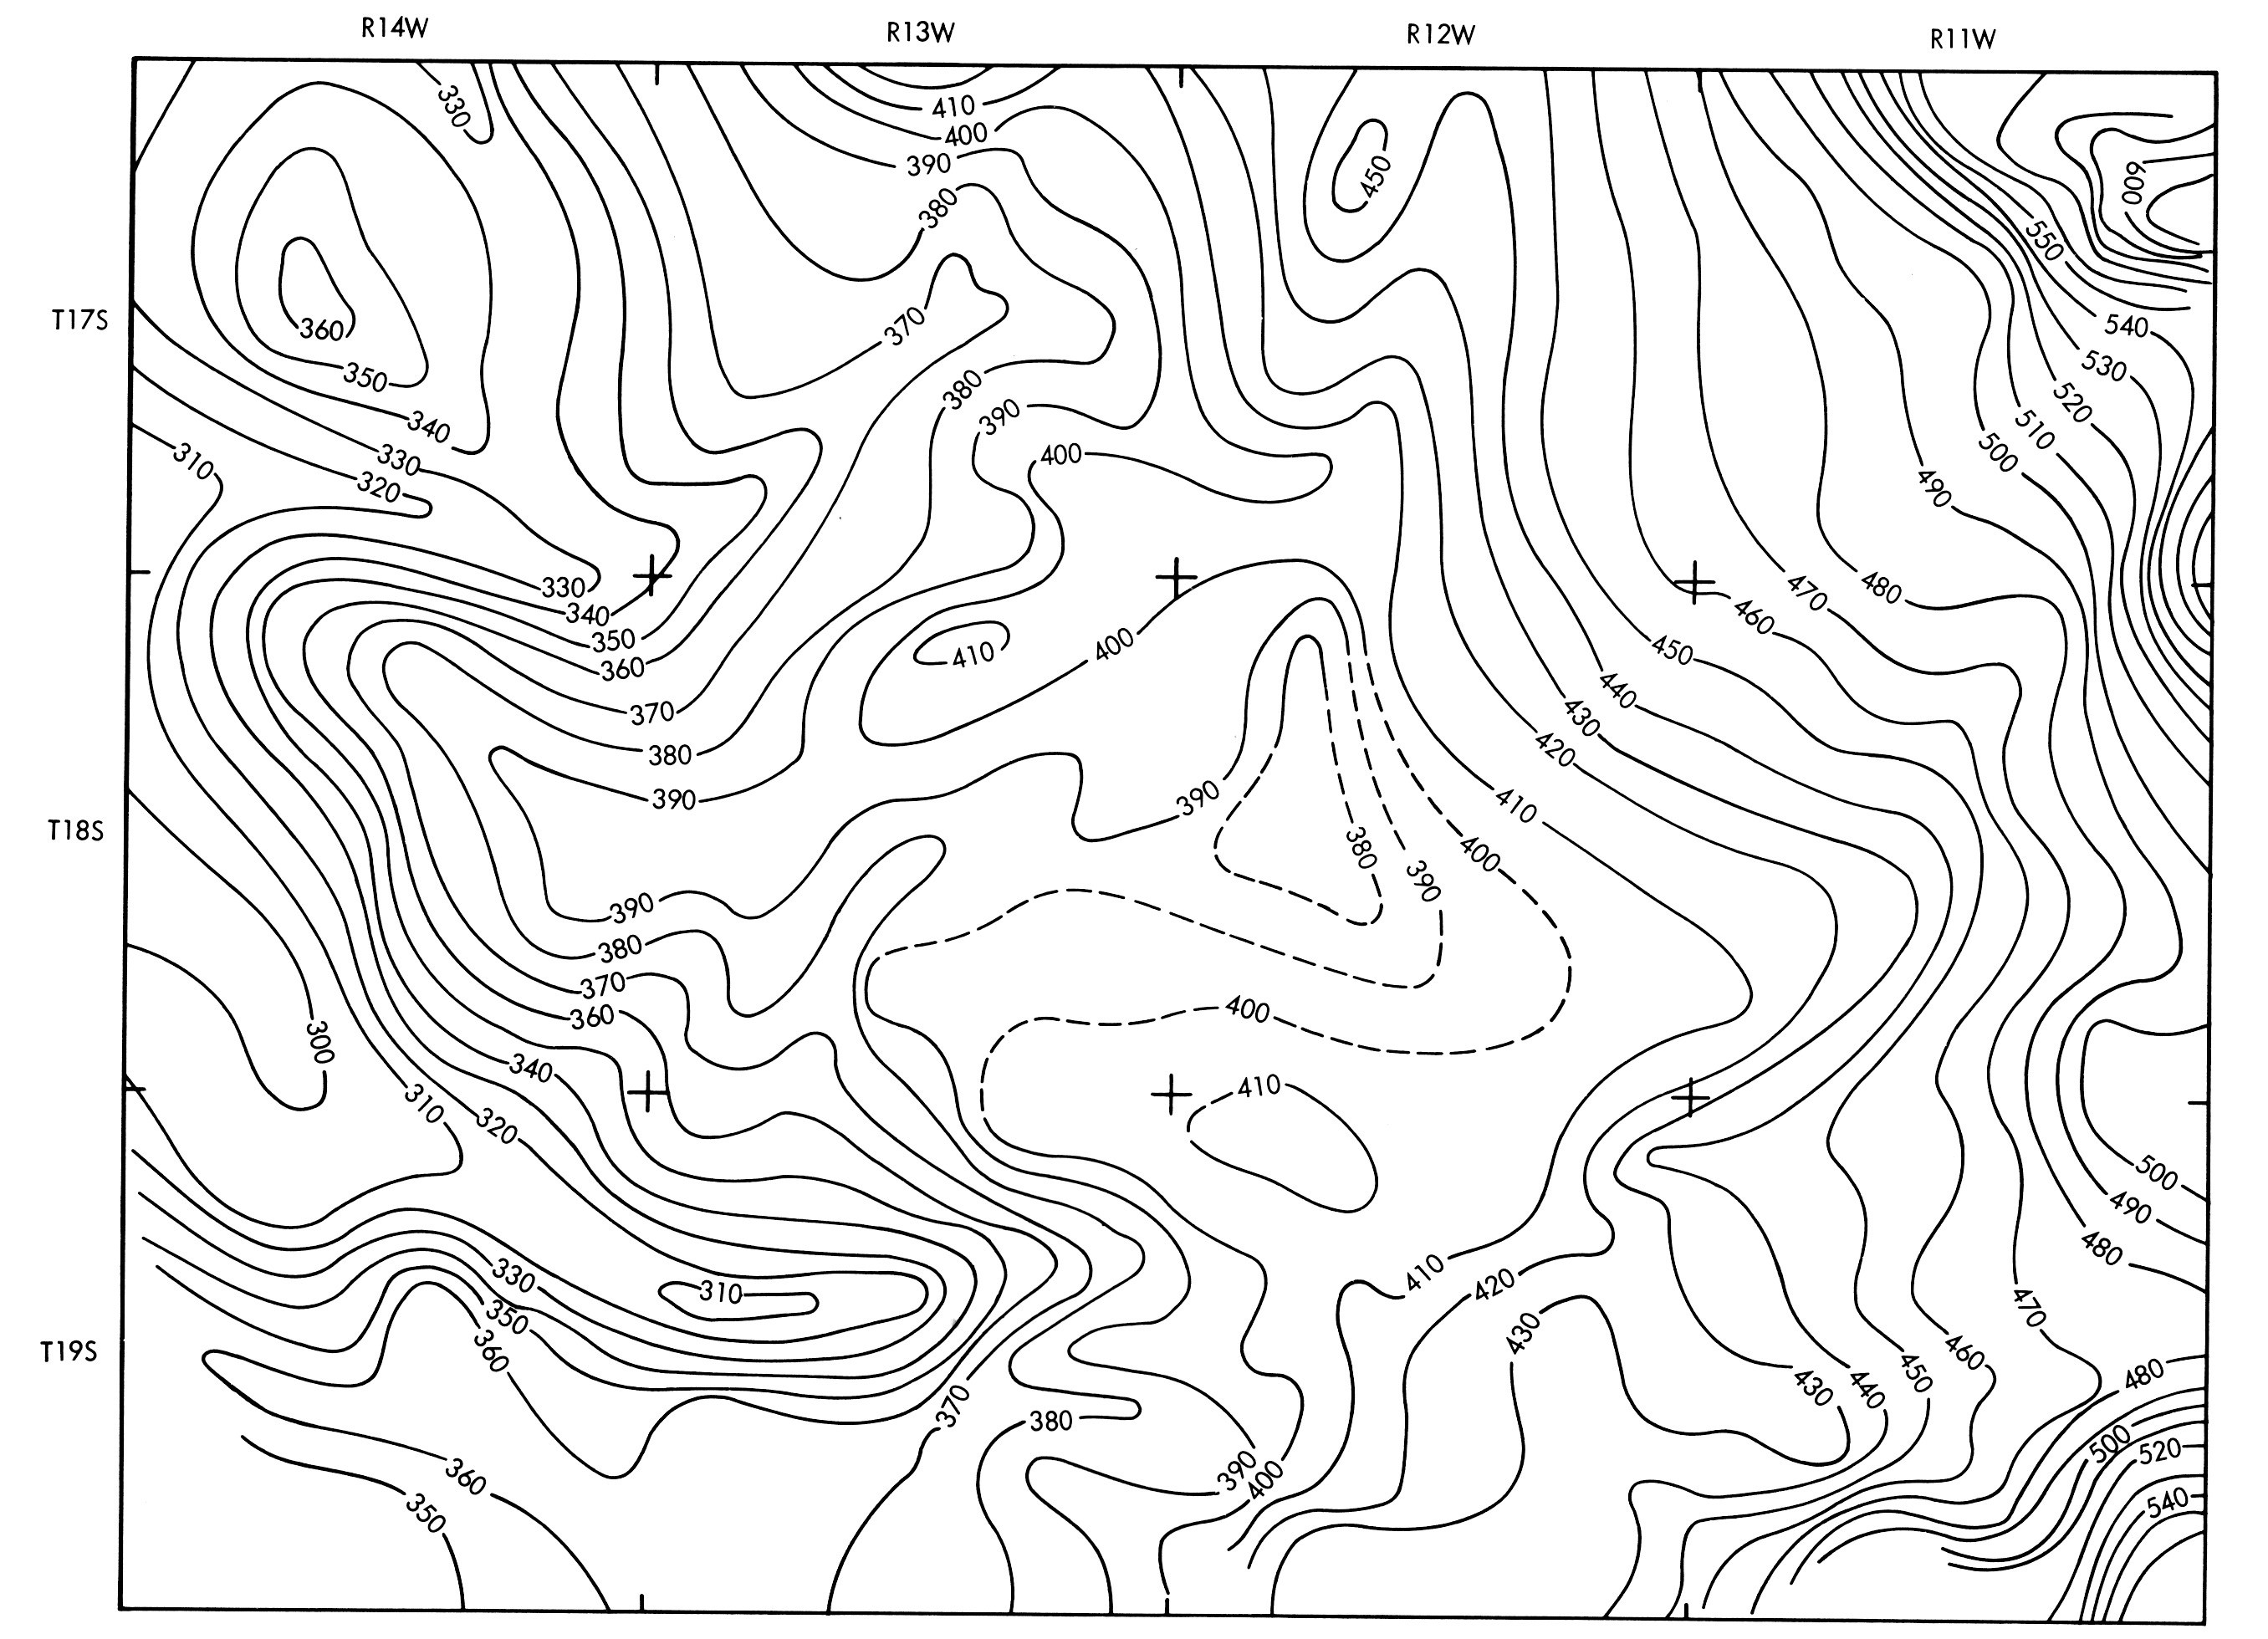 A map with contour lines on it, denoting height.